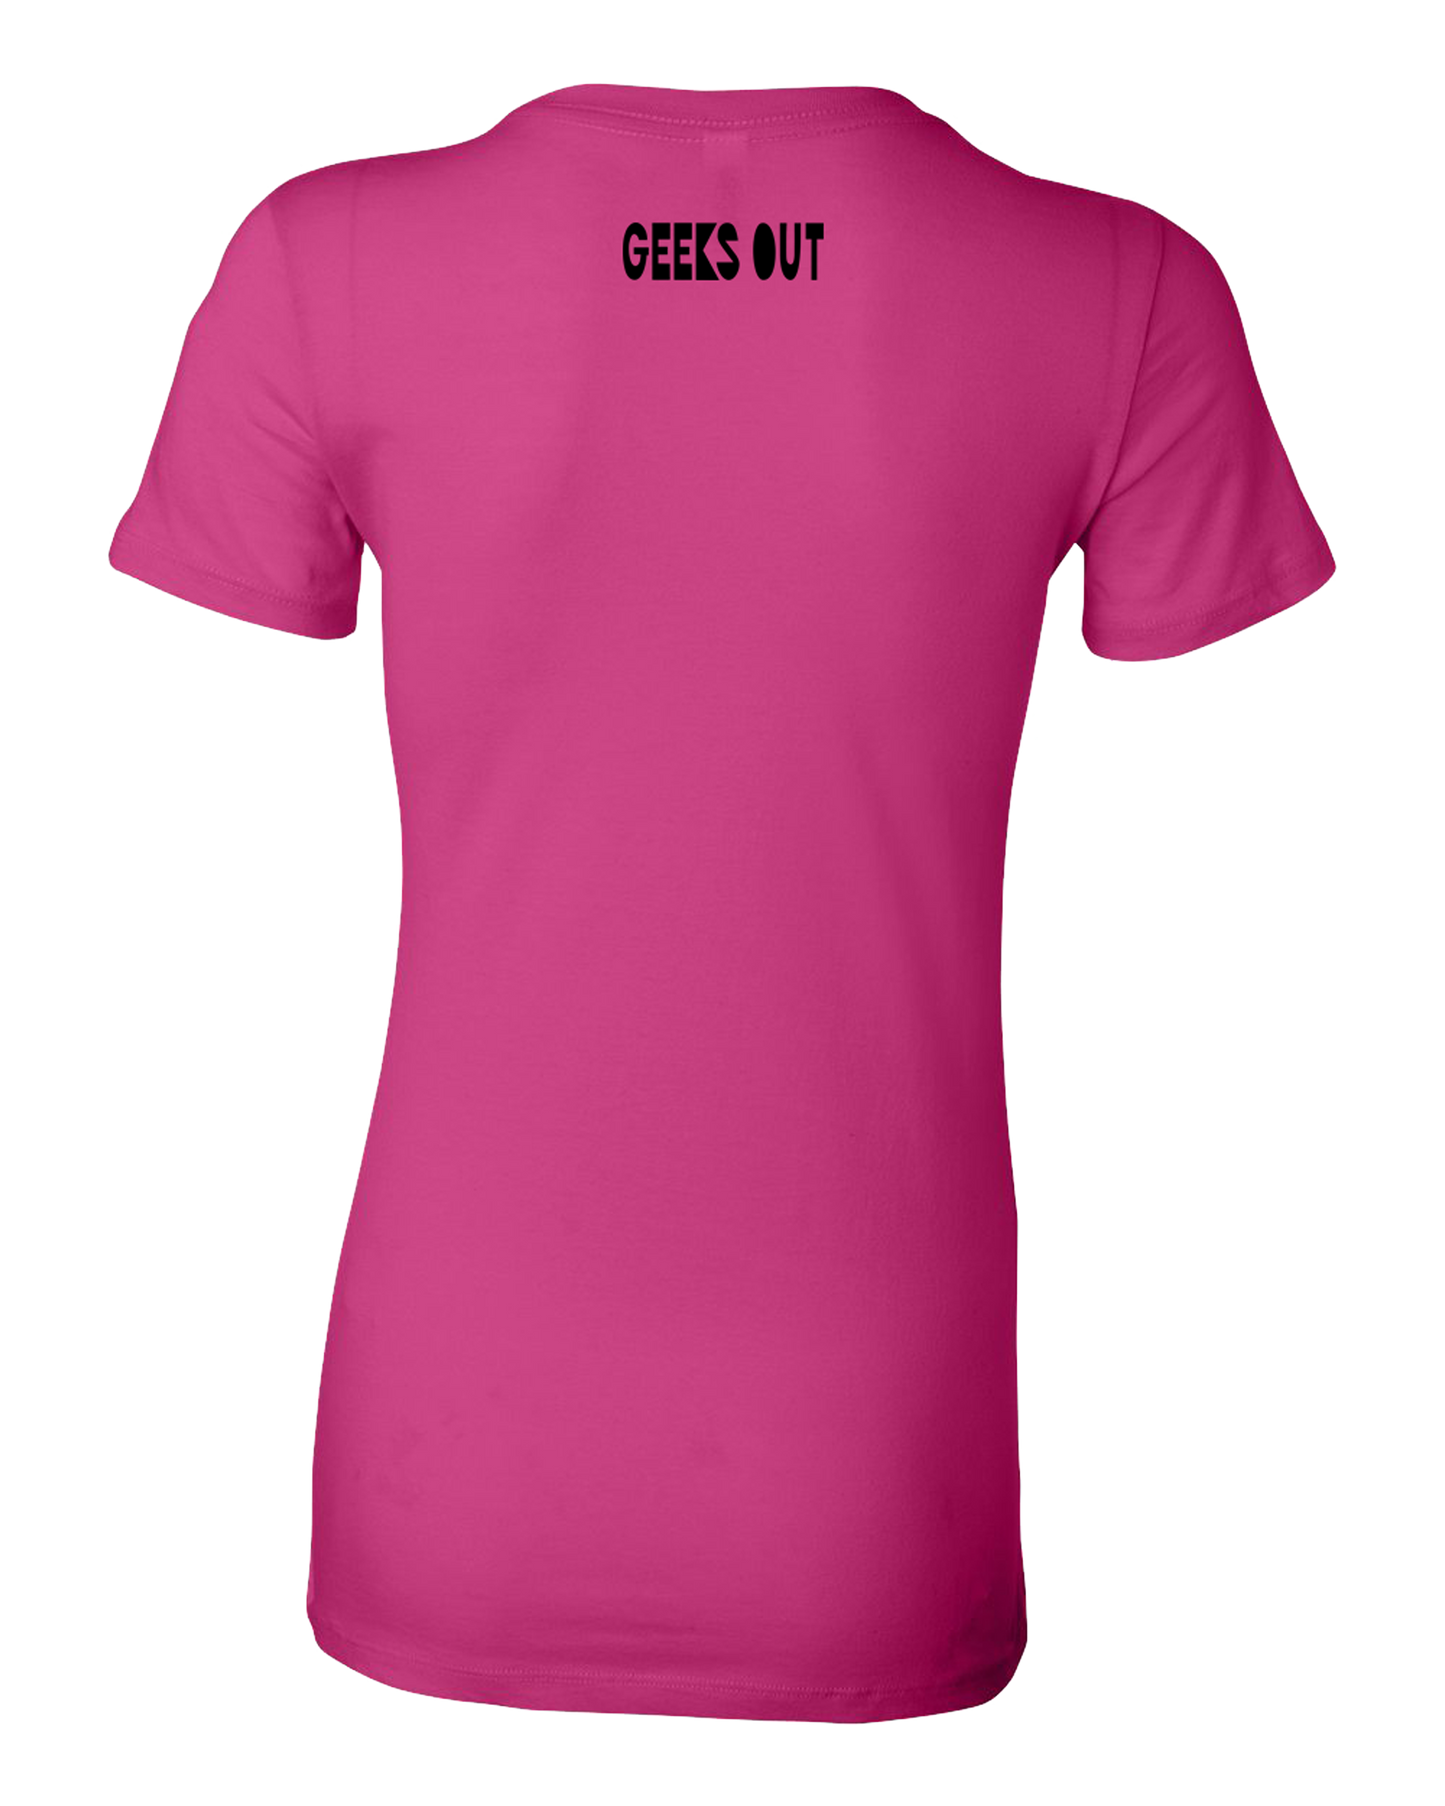 Strong Female Character Pink T-shirt - Fitted Cut